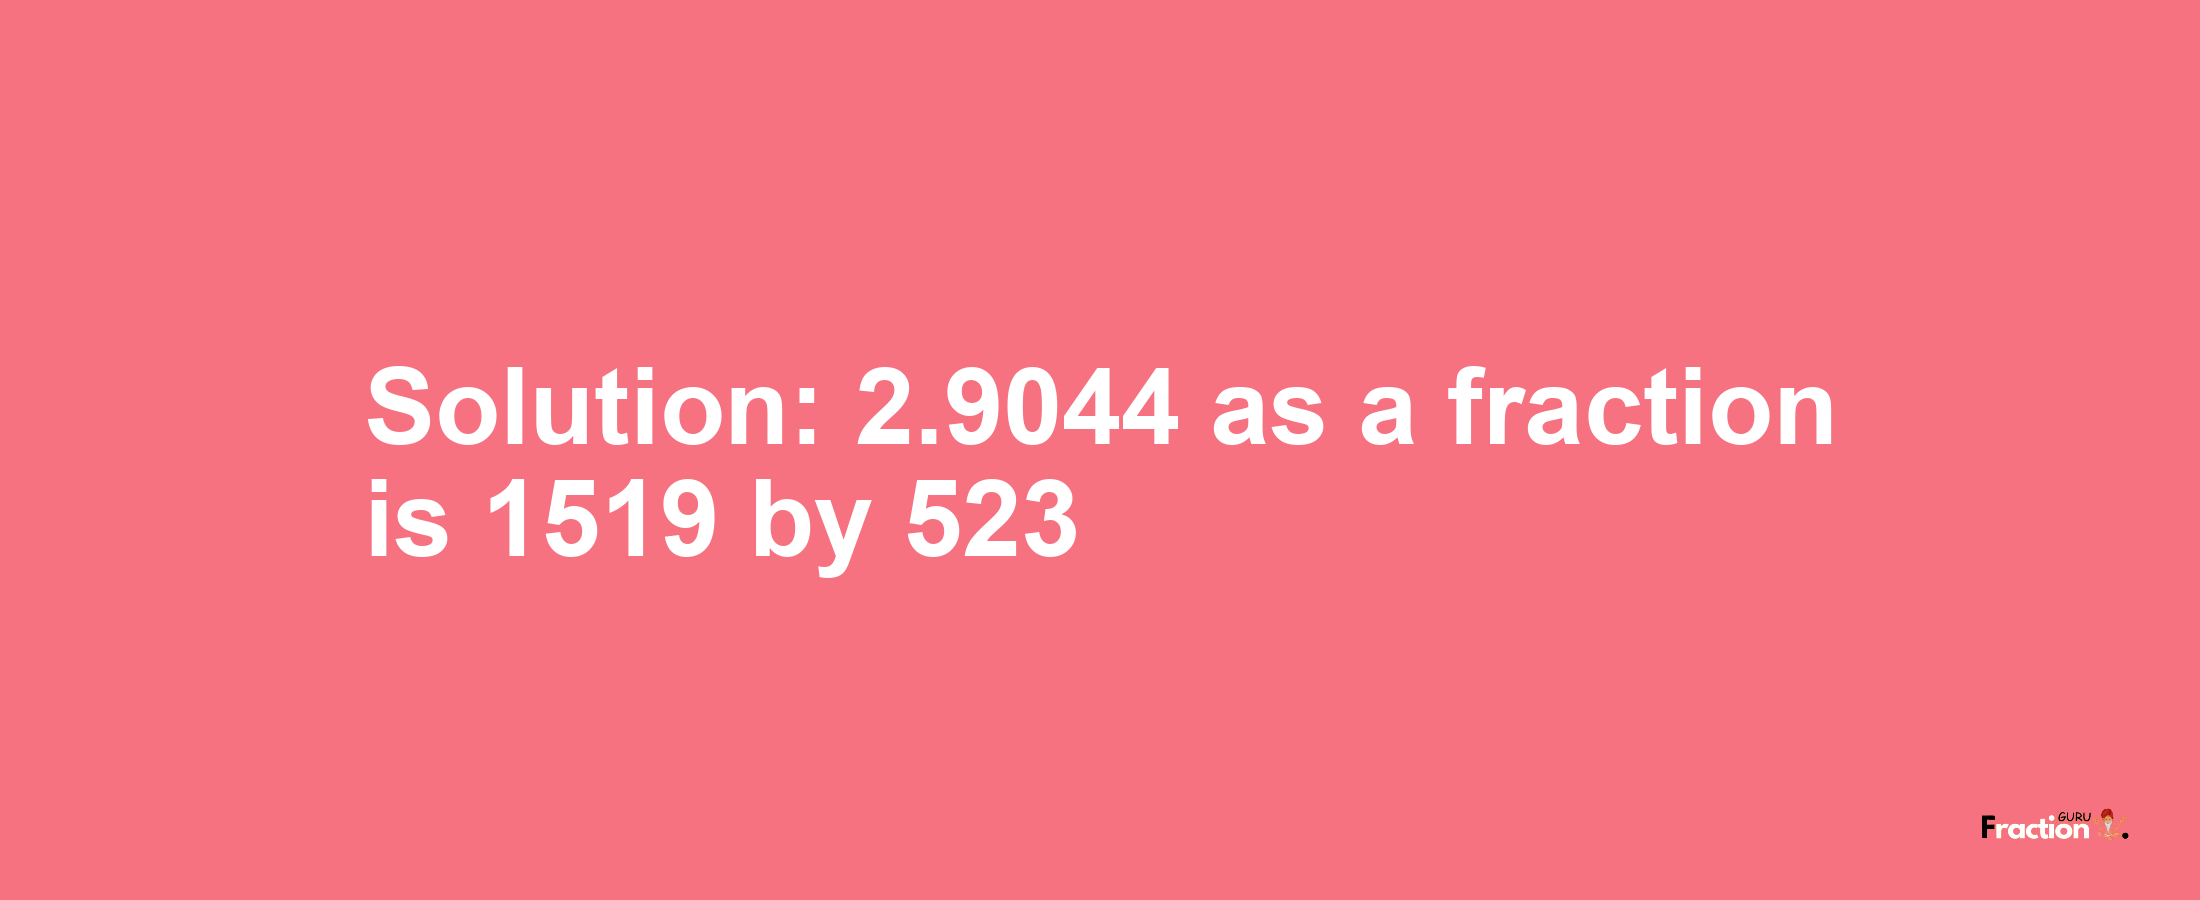 Solution:2.9044 as a fraction is 1519/523